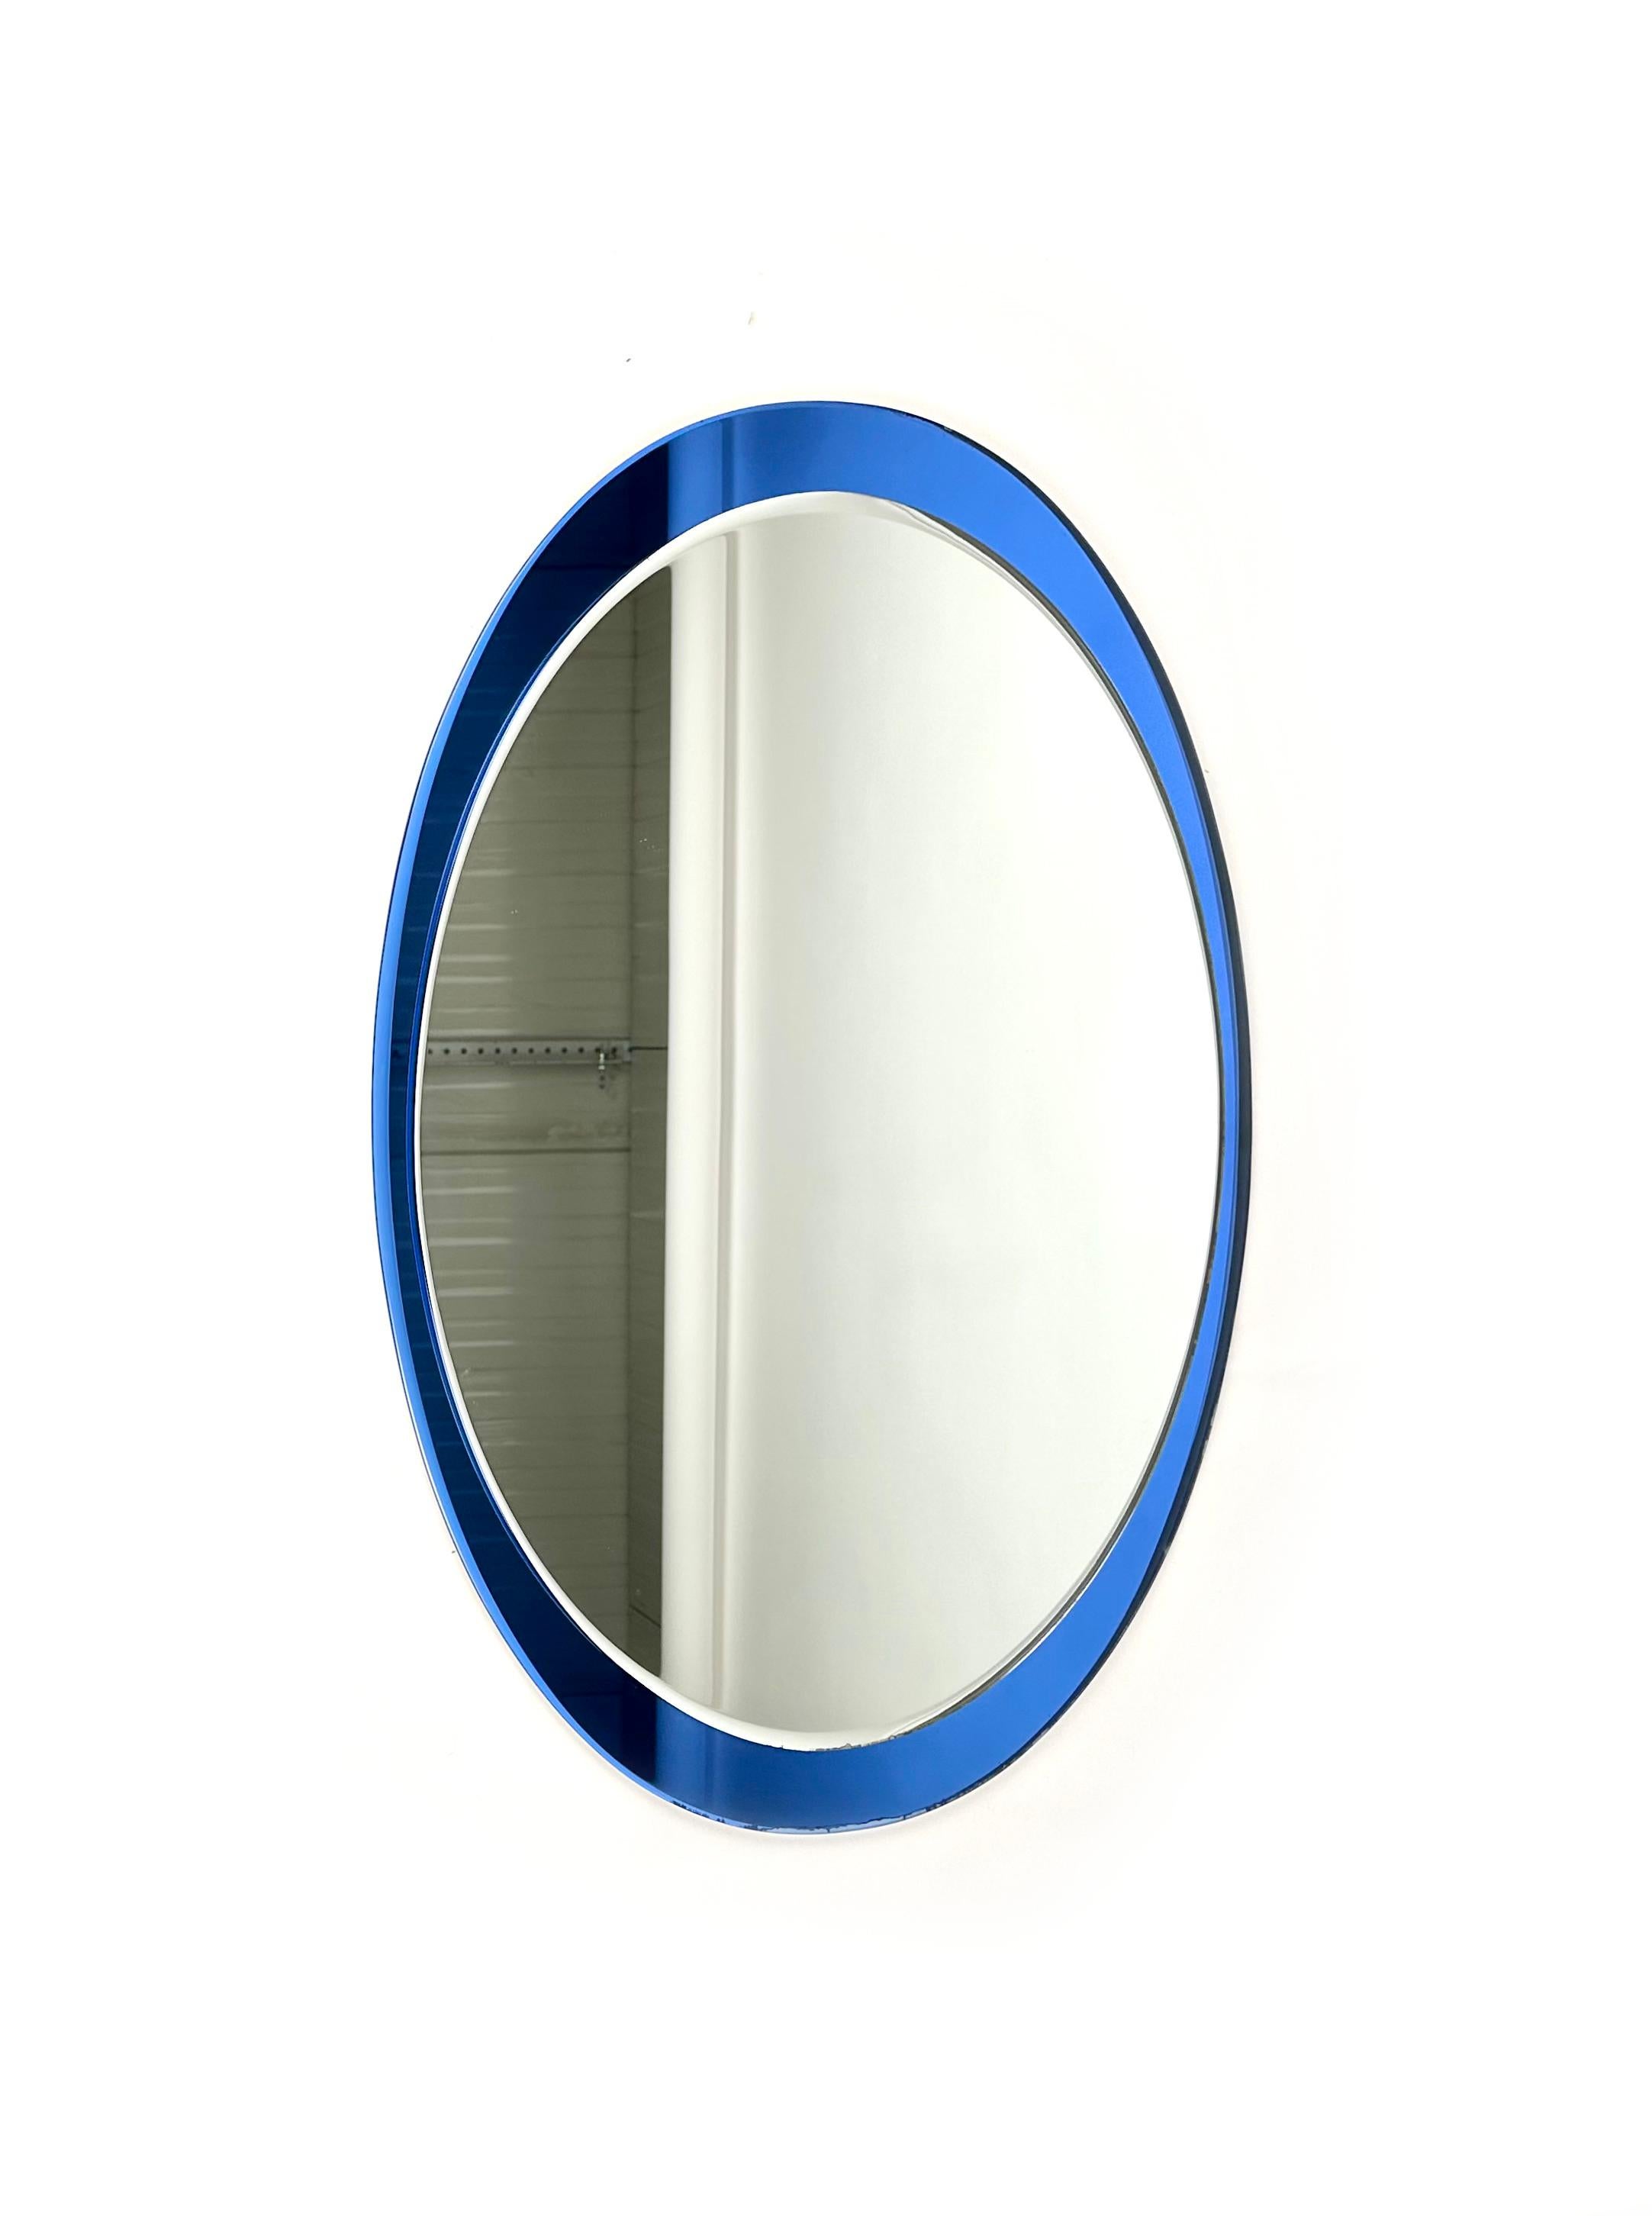 Mid-Century Modern Midcentury Oval Blue Wall Mirror by Metalvetro Galvorame, Italy, 1970s For Sale